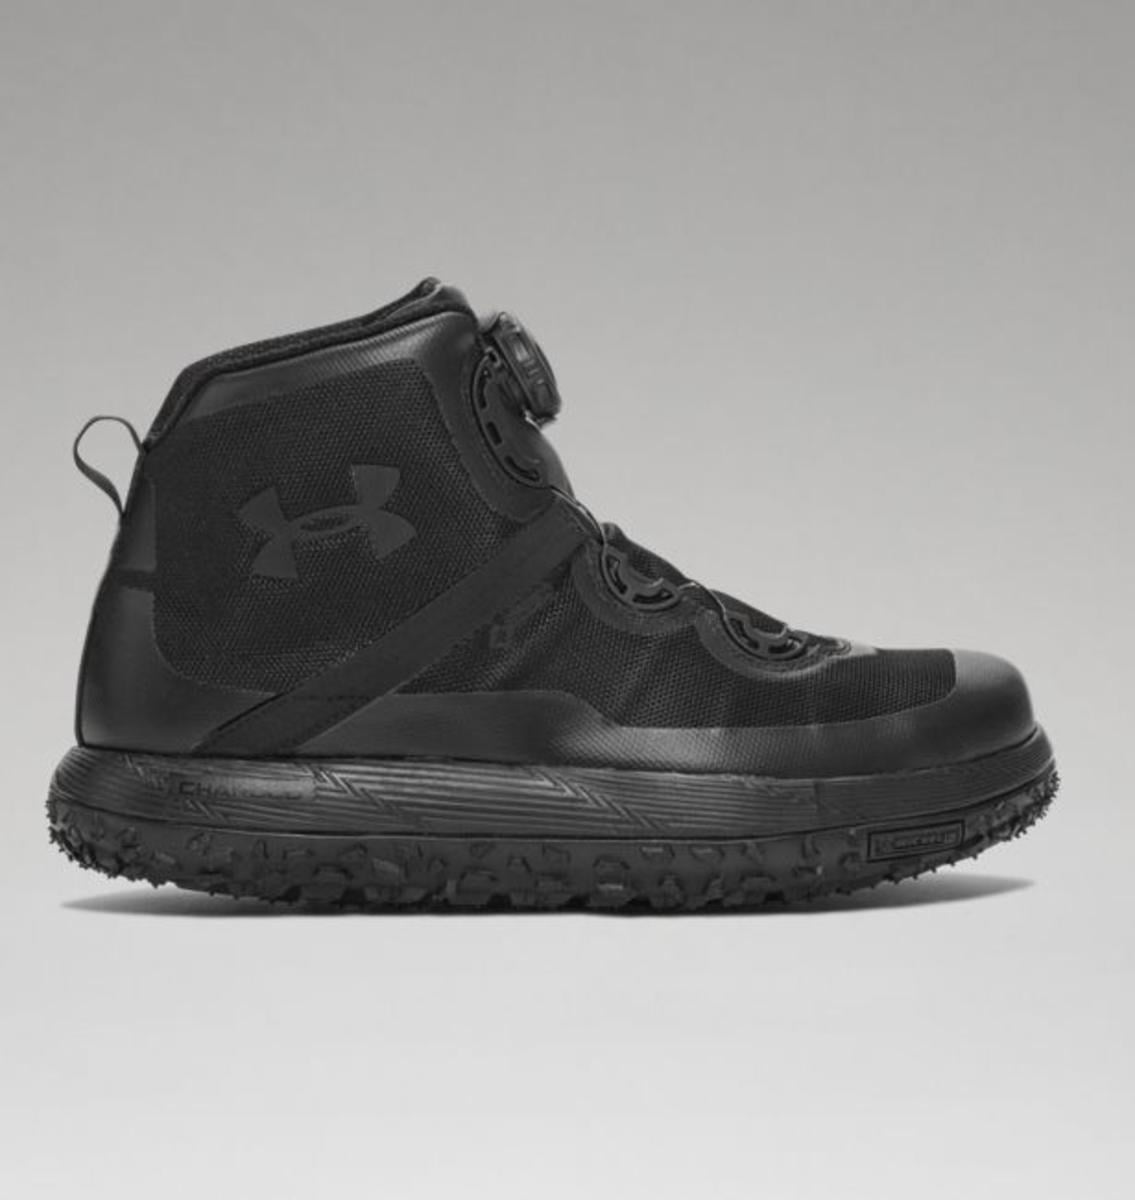 Under Armour Men's UA Fat Tire GORE-TEX Hiking Boots | lupon.gov.ph